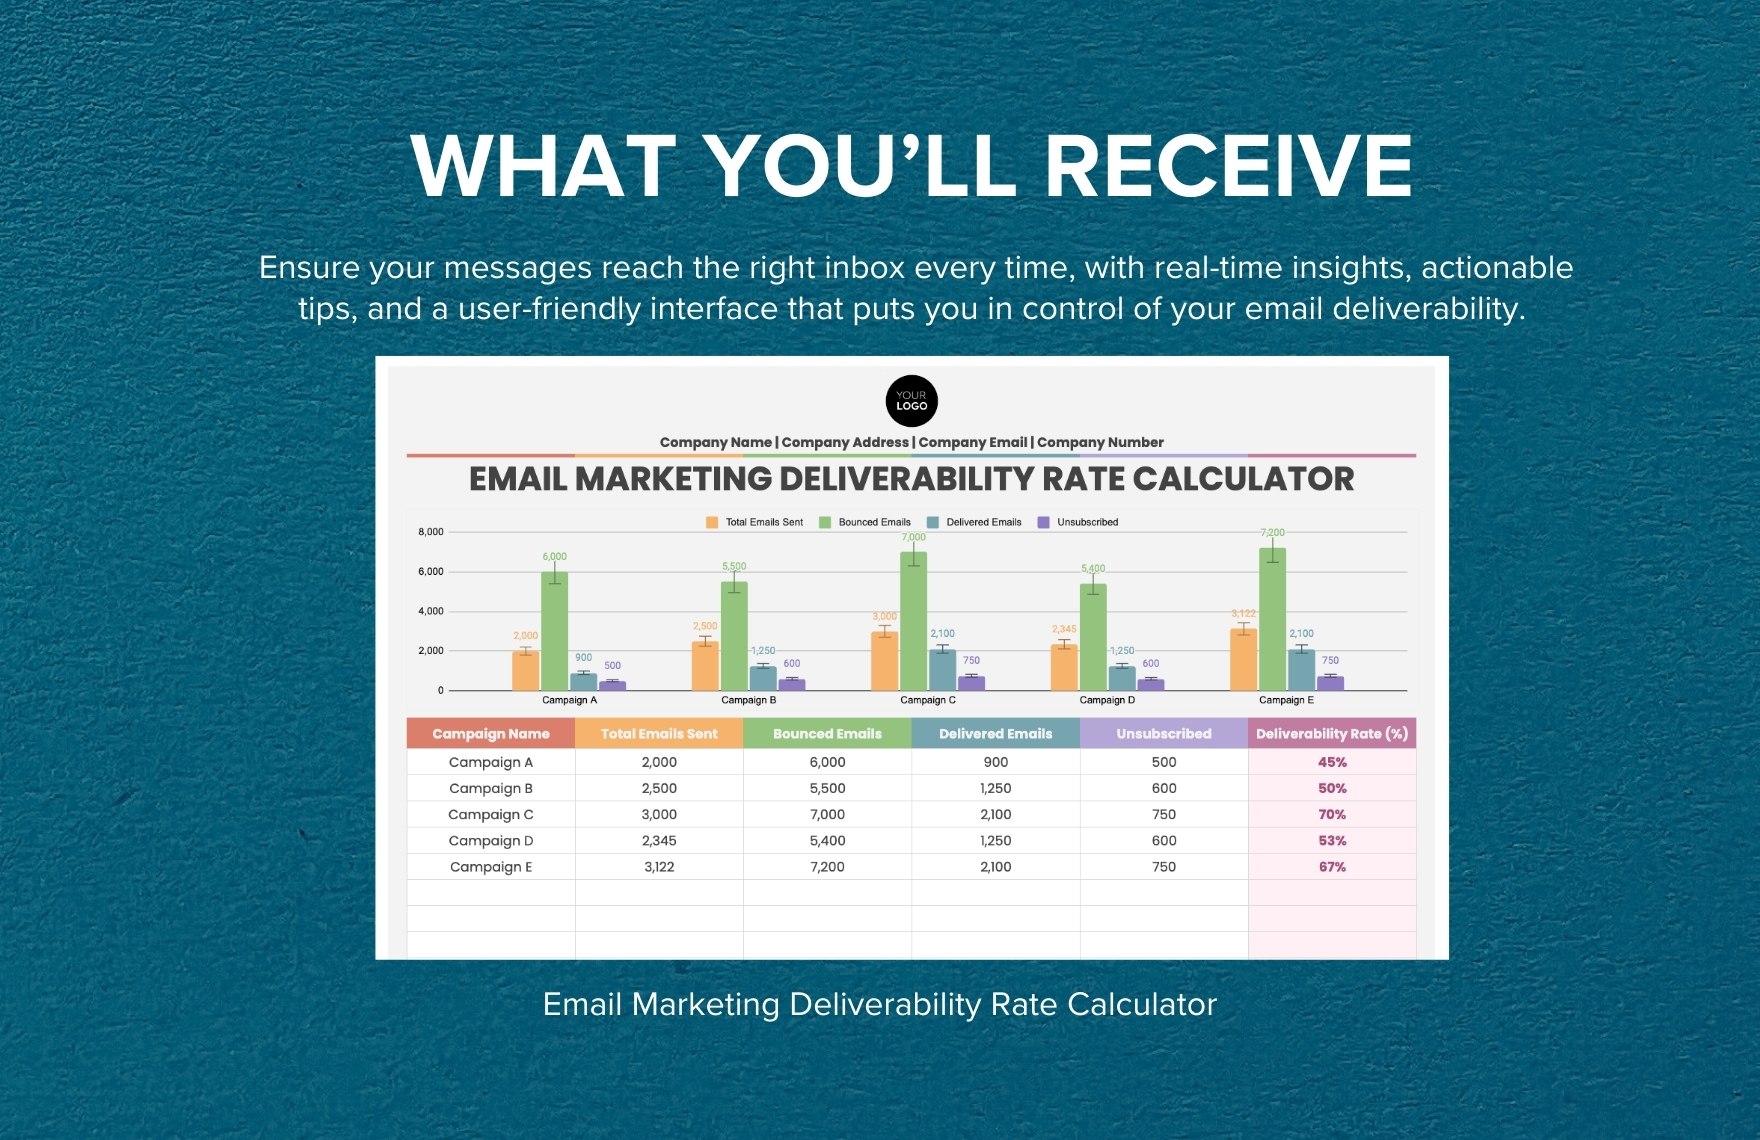 Email Marketing Deliverability Rate Calculator Template